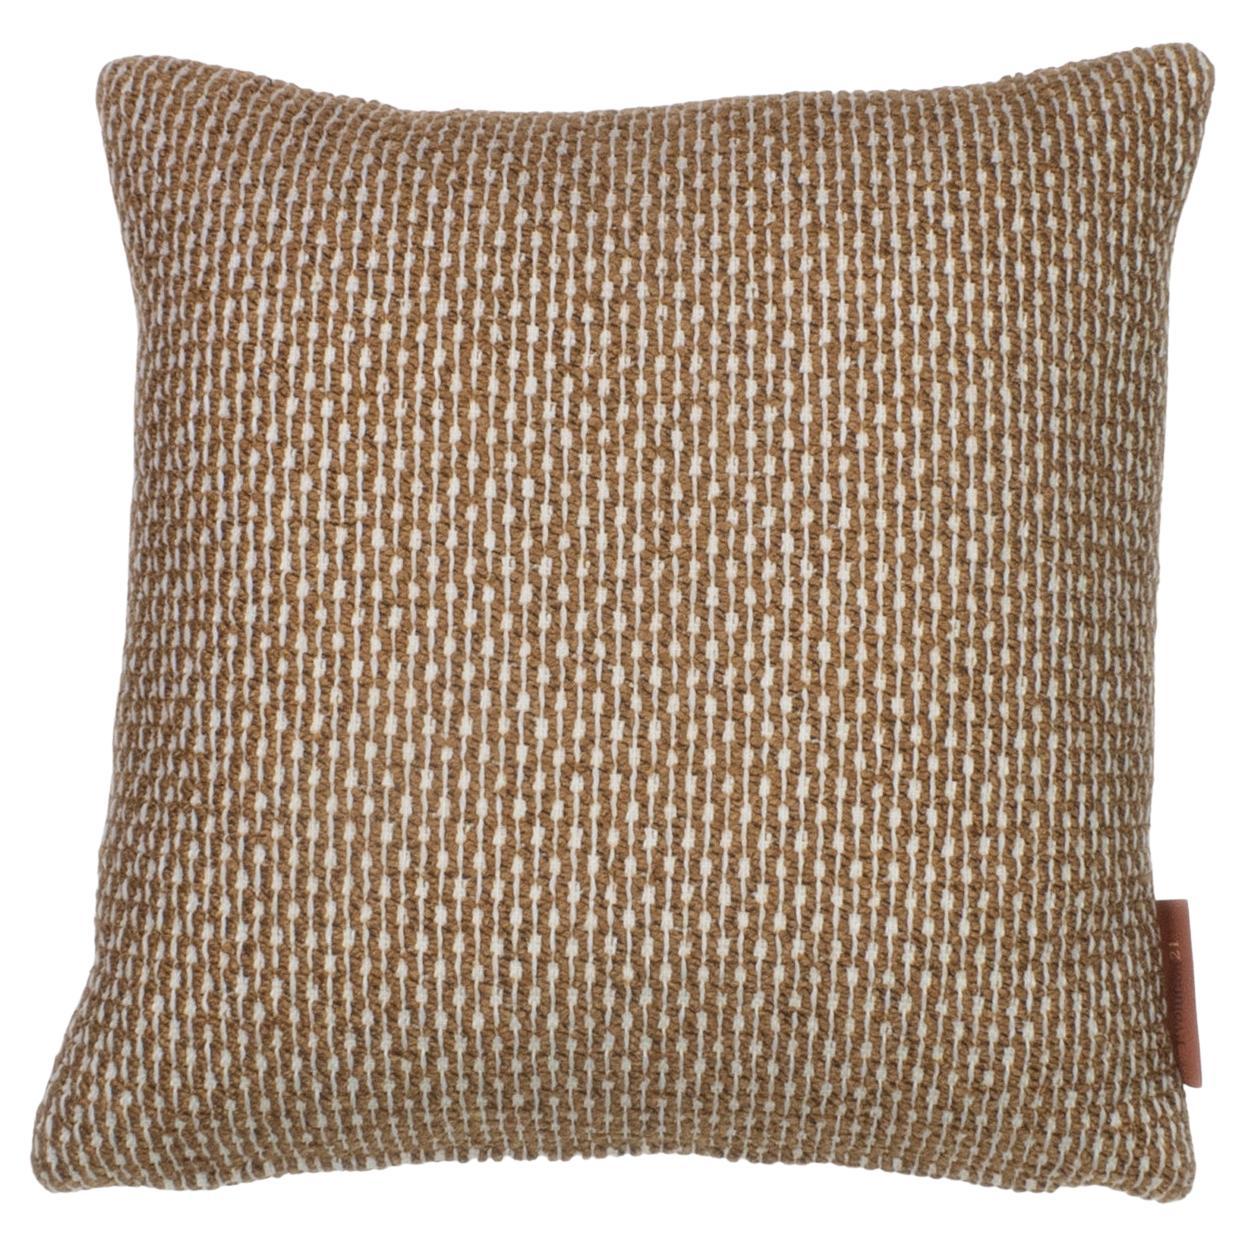 Cushion / Pillow Pampas Sand by Evolution21 For Sale